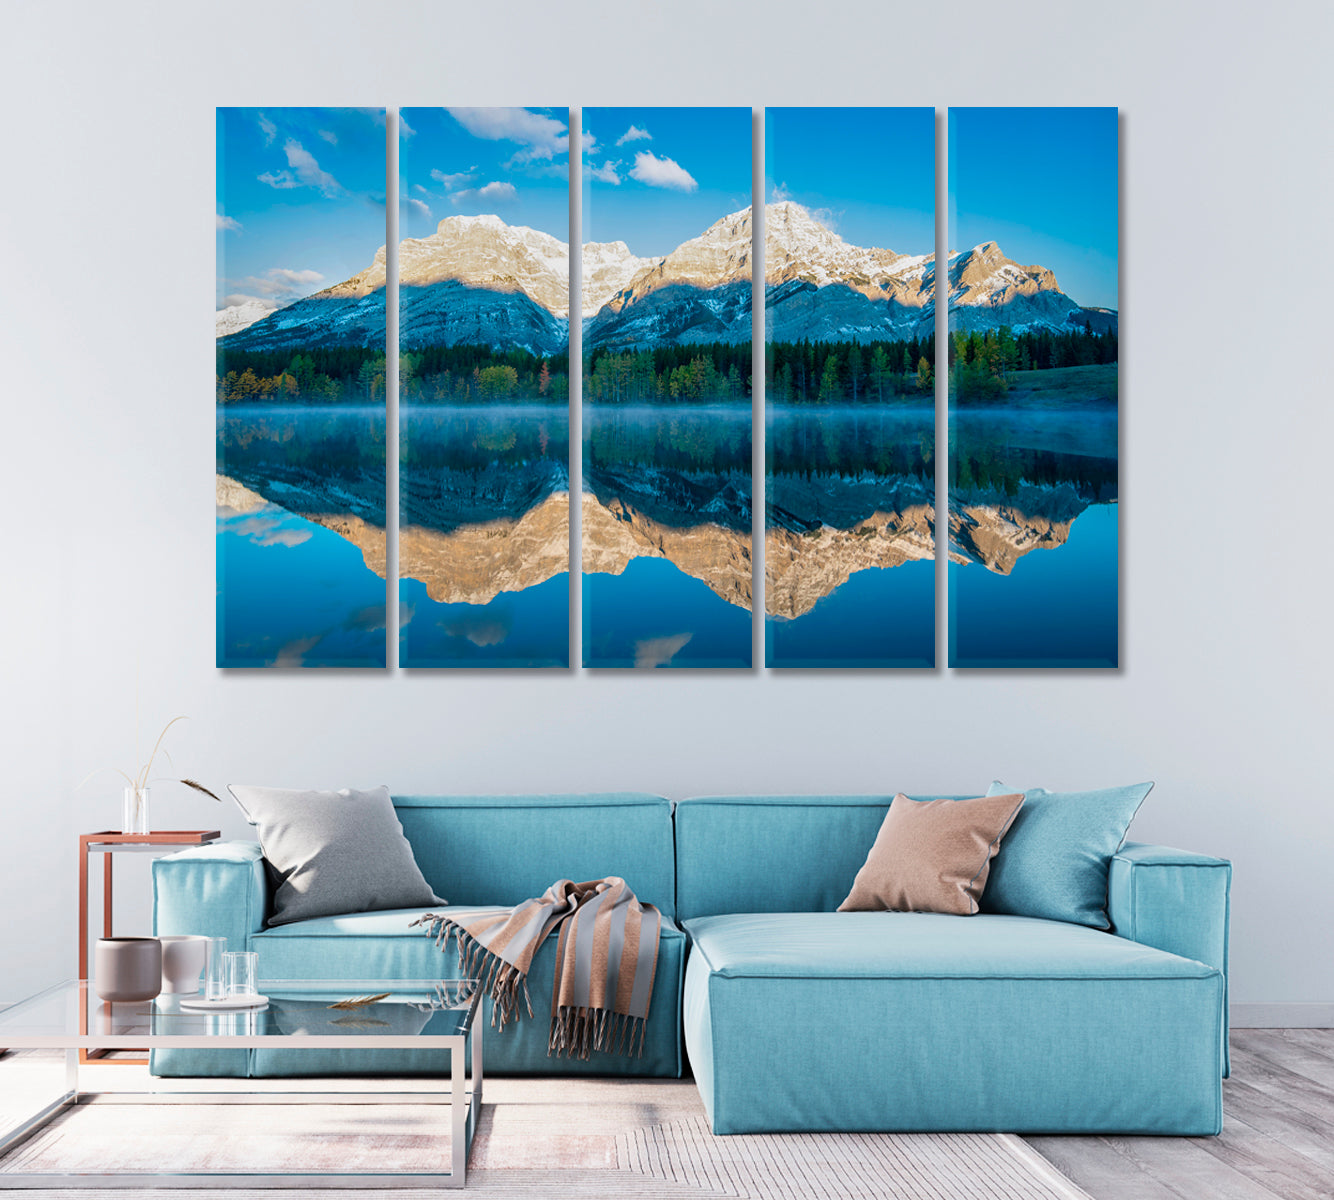 Wedge Pond with Mountain Reflection Alberta Canvas Print-Canvas Print-CetArt-1 Panel-24x16 inches-CetArt